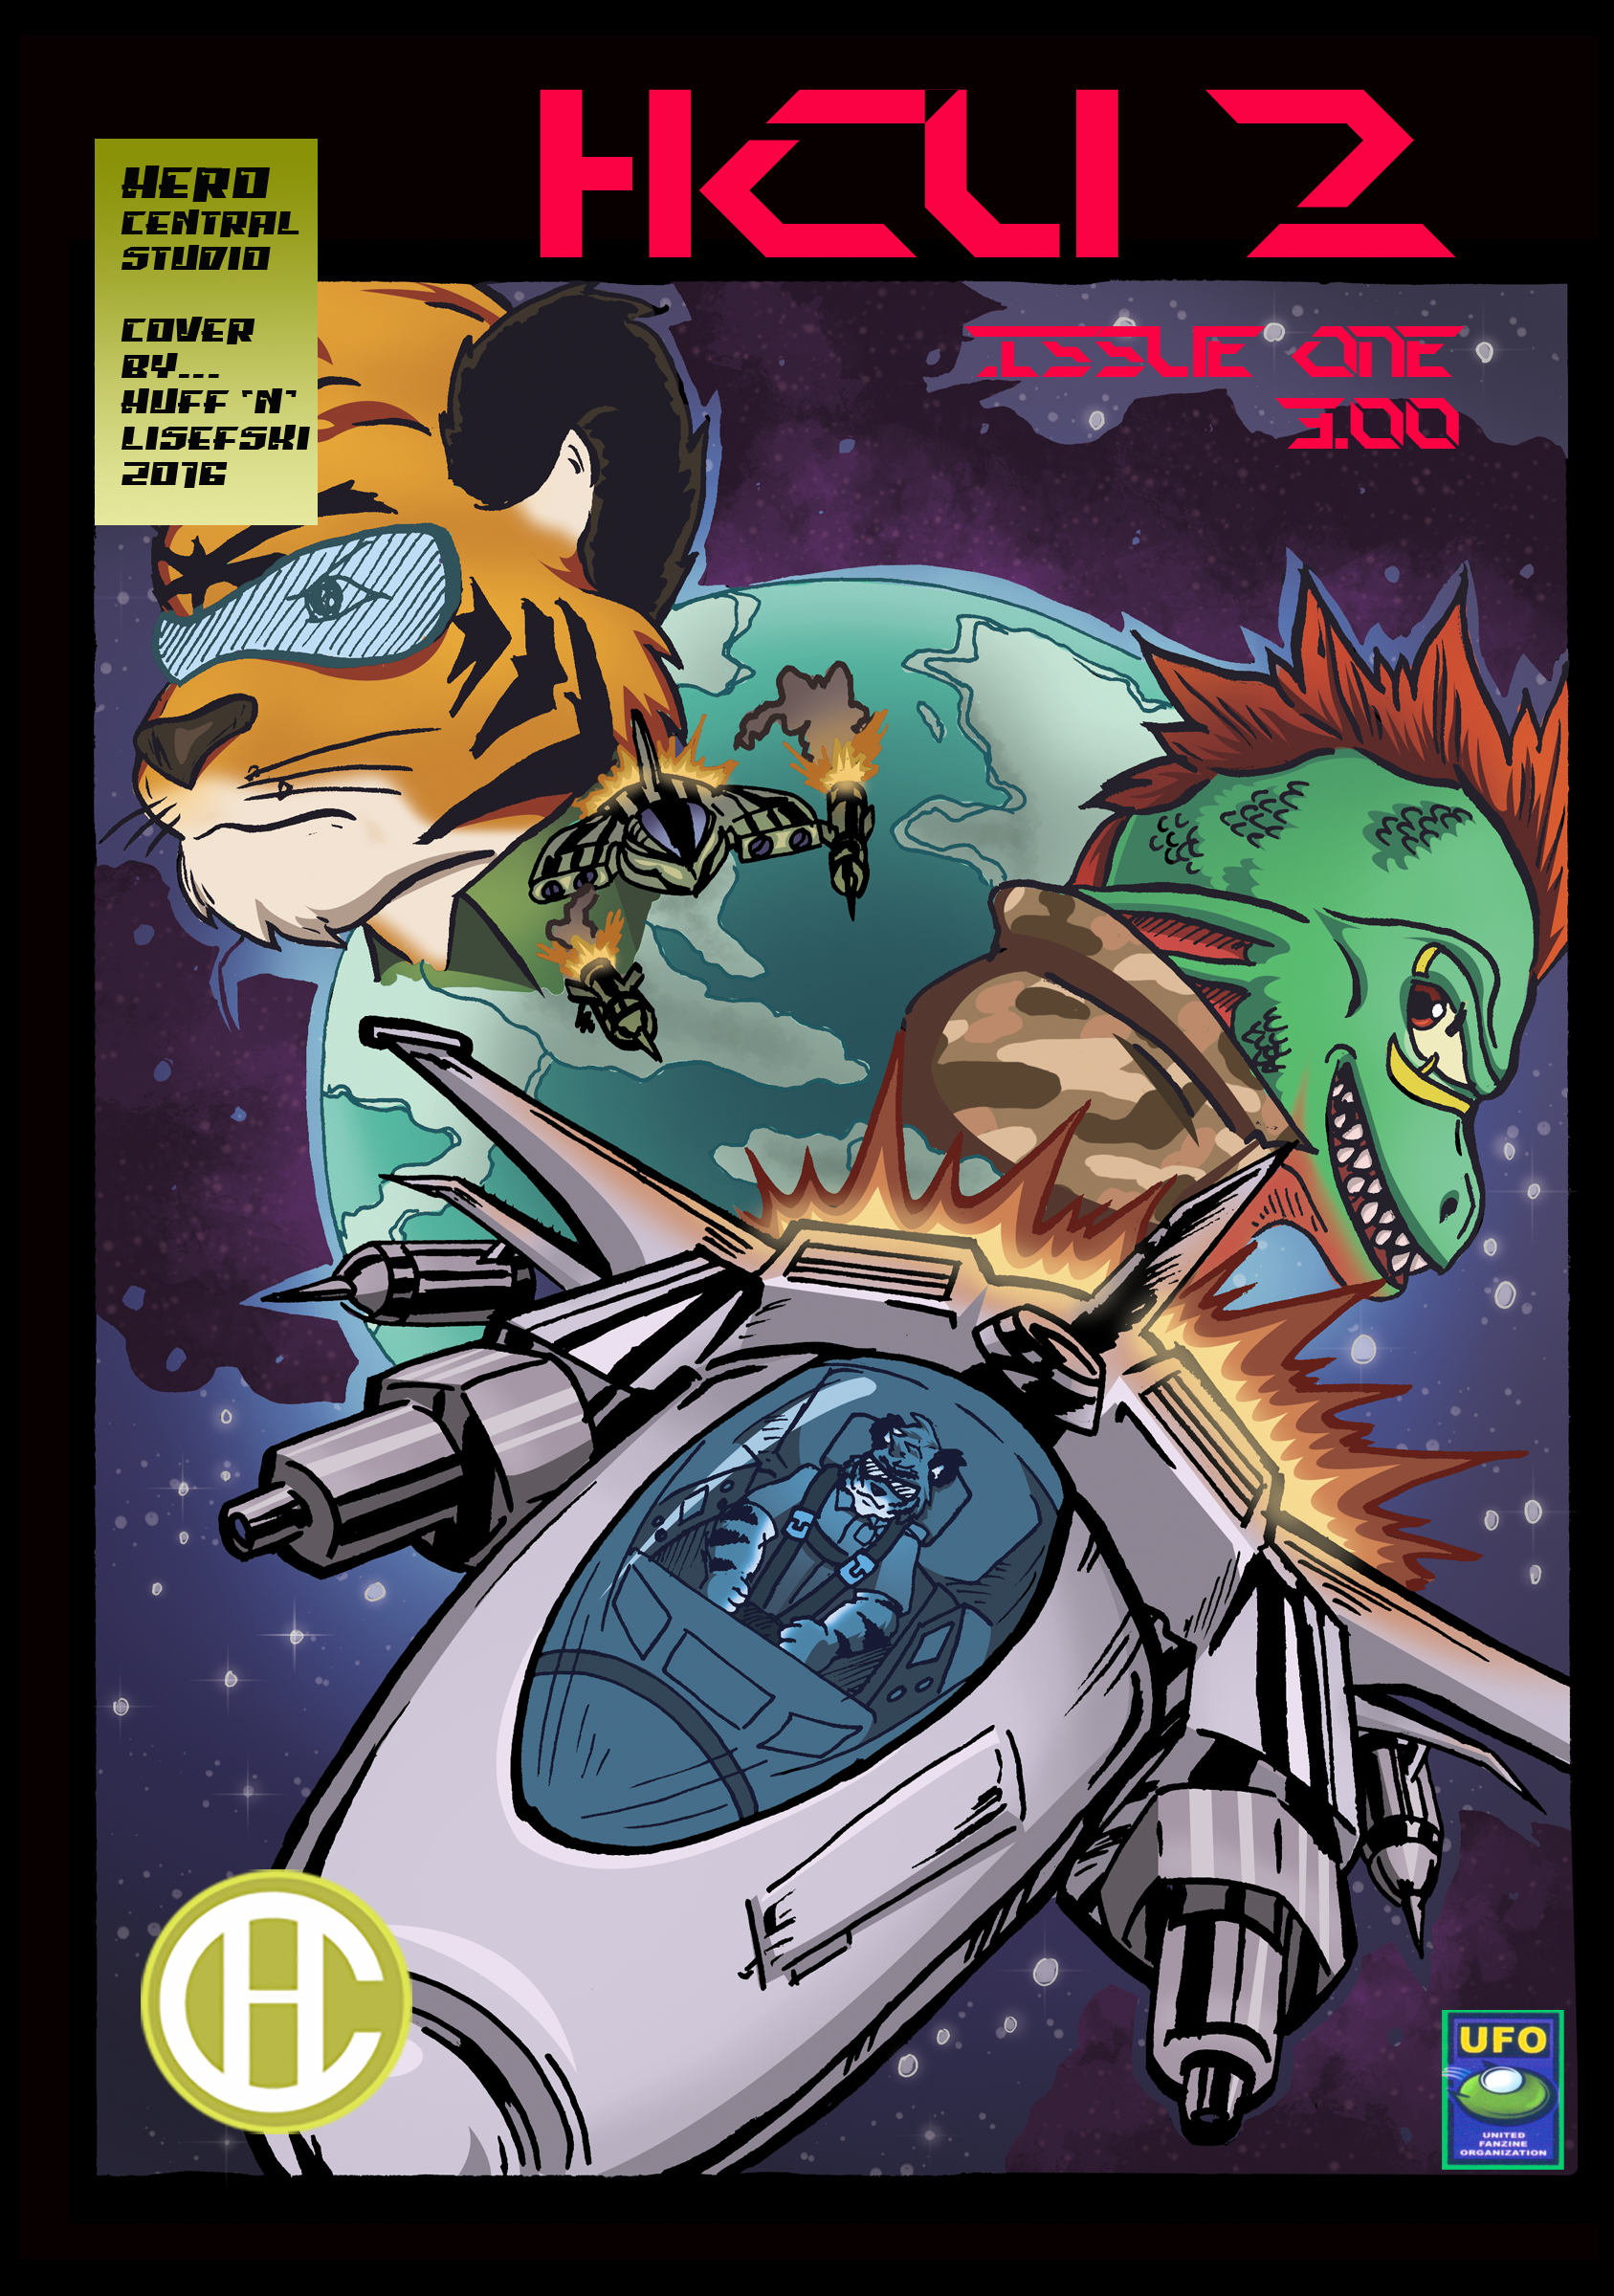 We get to experience the Aesir's artificial world which is the Galactic Defense Resource as they constantly scan nearby galaxies to keep the peace which is indeed a very difficult task. The Aesir send a transport sphere to help planet Zoa's newest defender, Captain Teg Furro. Special cover by Marques Huff, colors by Steve Lisefski. Available at $3.00 for hard copy, $0.99 for digital copy. Co-published by UFO.